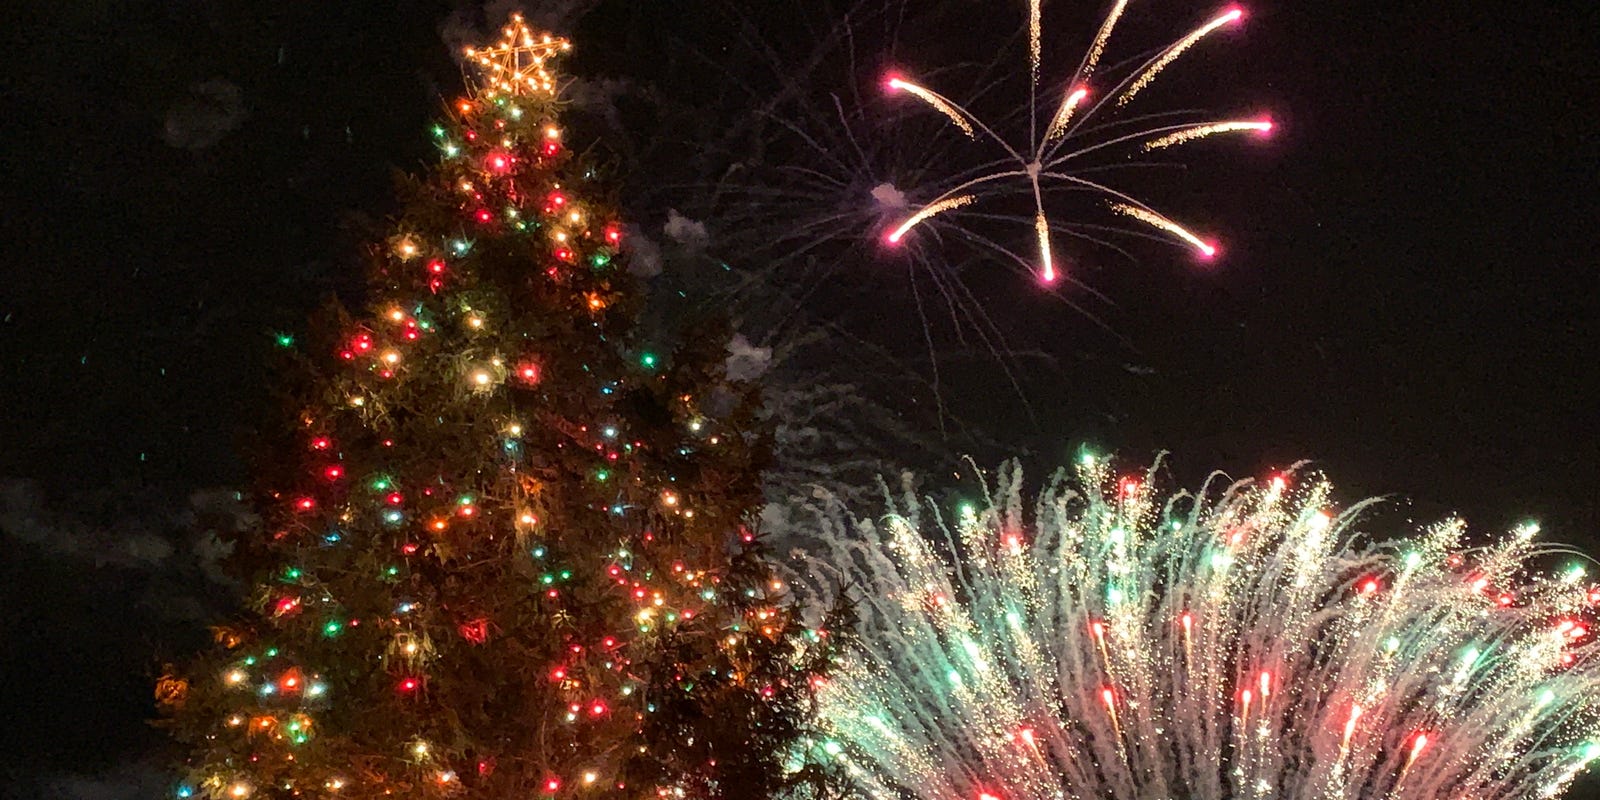 Celebrate the holidays with parades, tree lighting, concerts and more